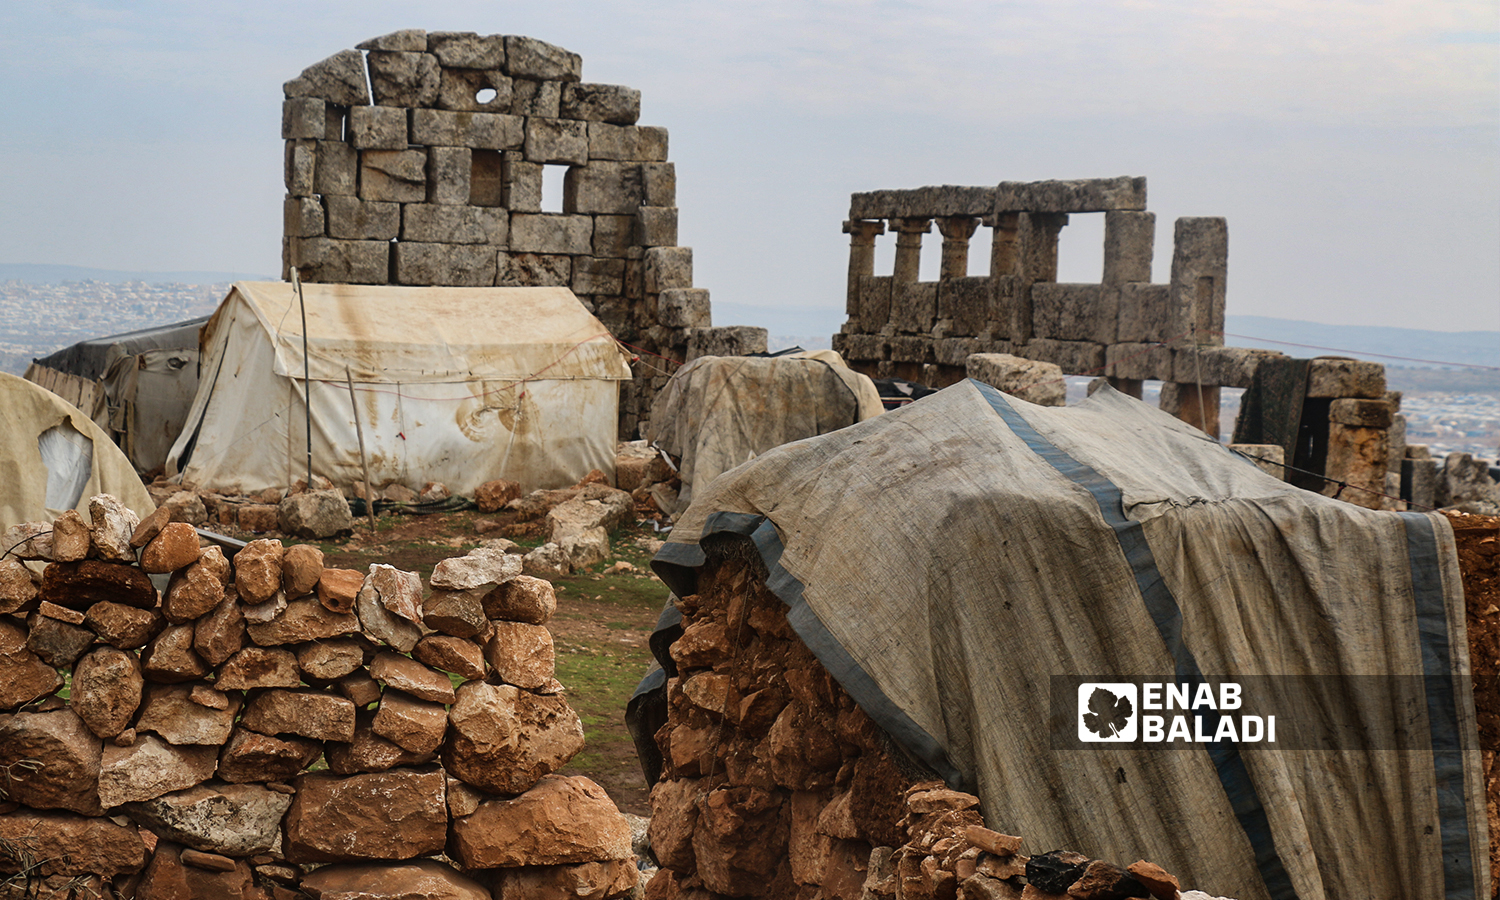 Displaced Syrians had their tents set up in the ancient Sarjableh area in the northern countryside of Idlib governorate - 22 January 2022 (Enab Baladi / Iyad Abdul Jawad)
